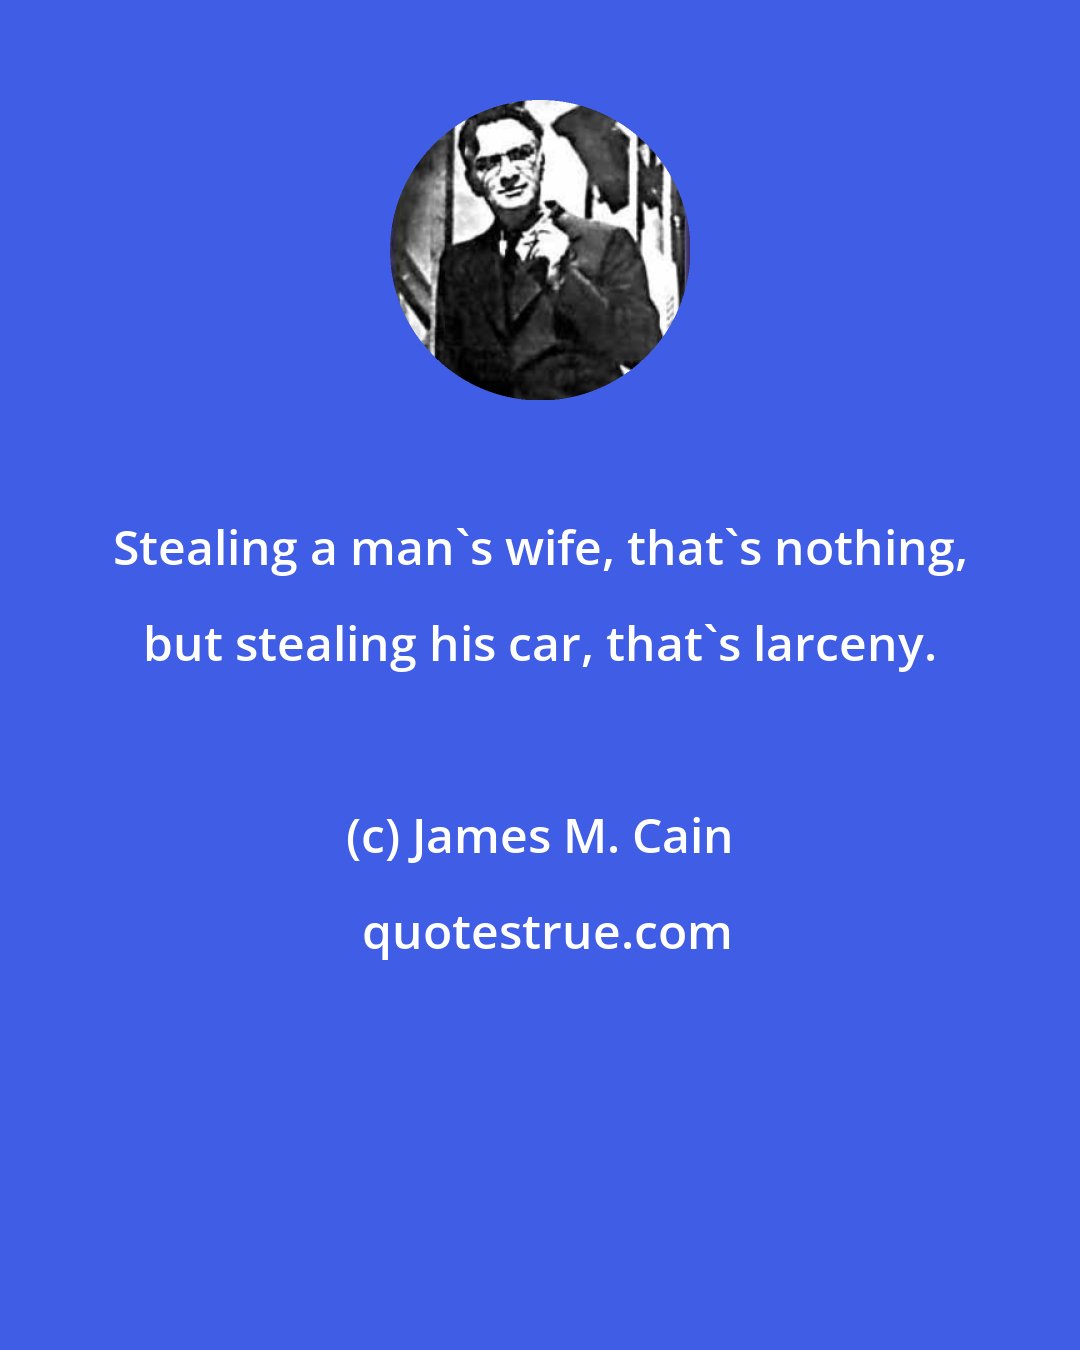 James M. Cain: Stealing a man's wife, that's nothing, but stealing his car, that's larceny.